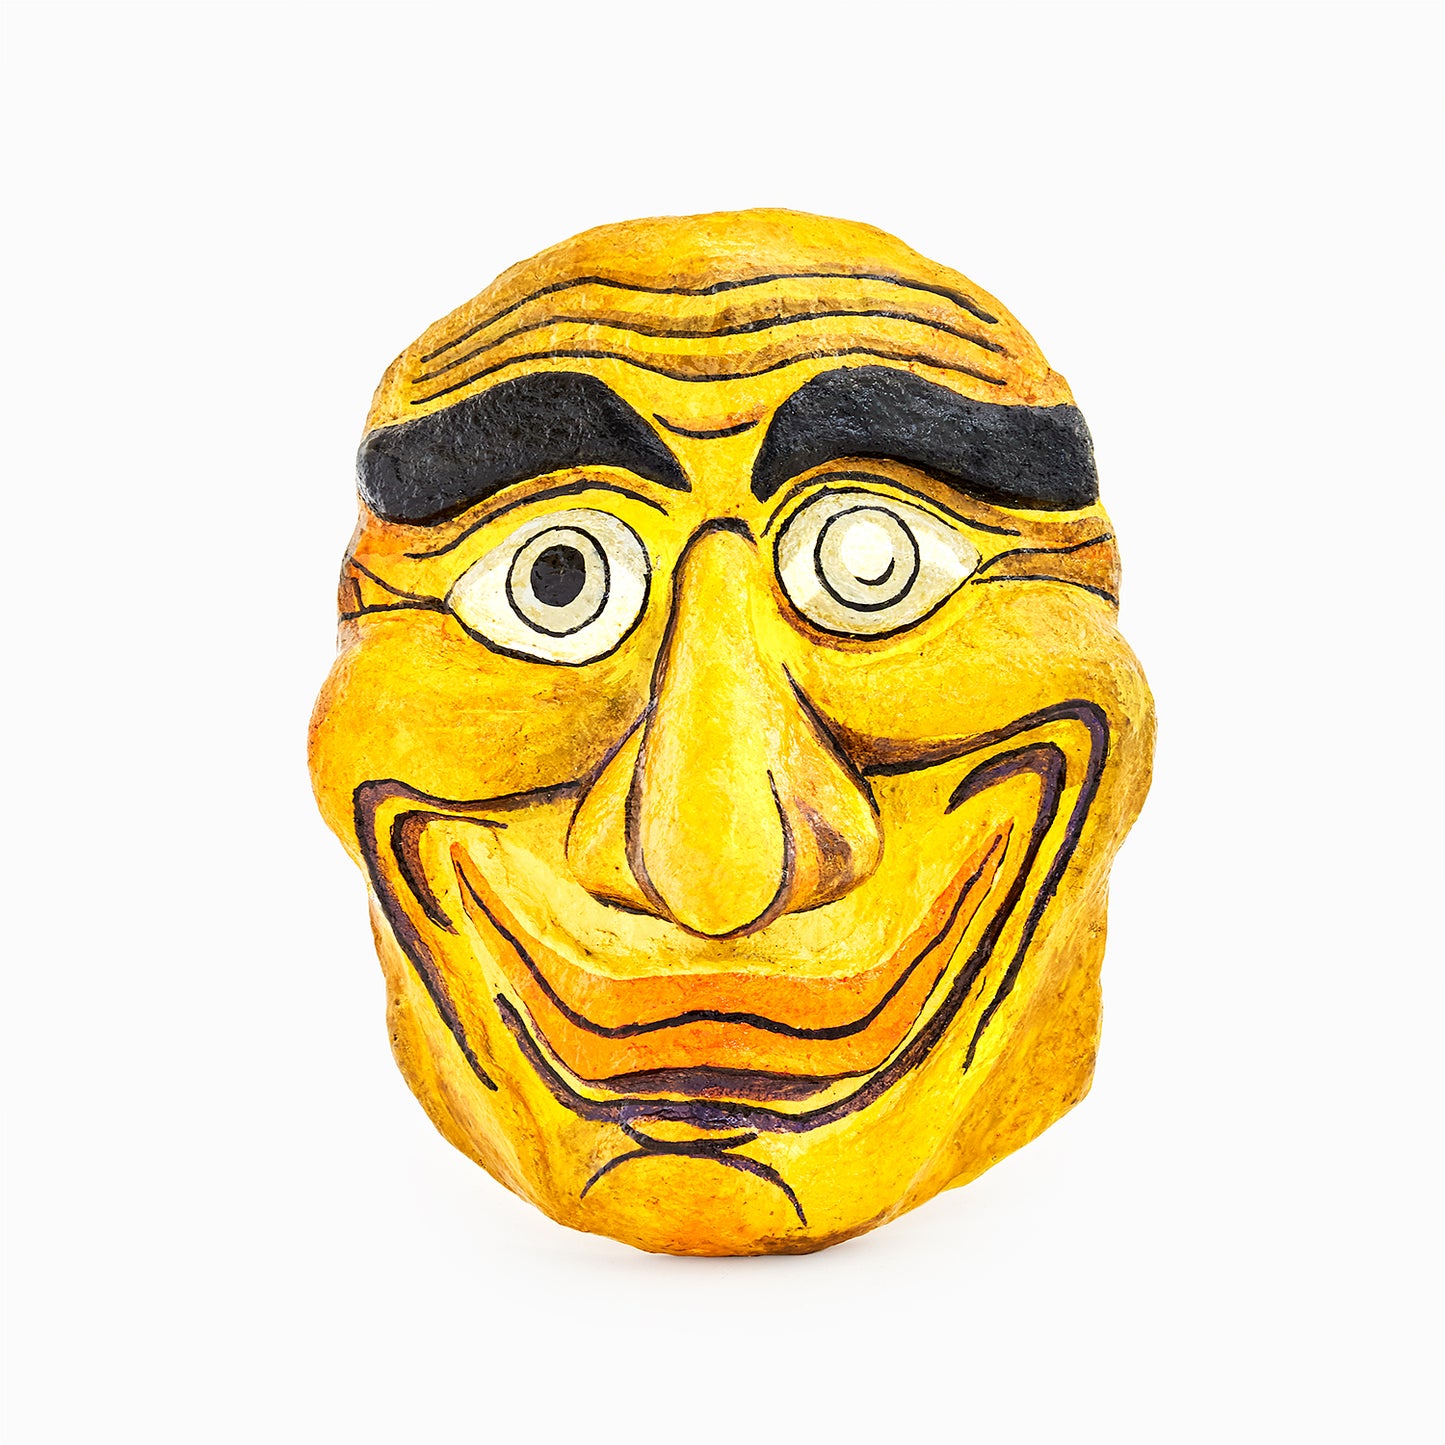 Funny Old Man - Face Mask for Wall Hanging